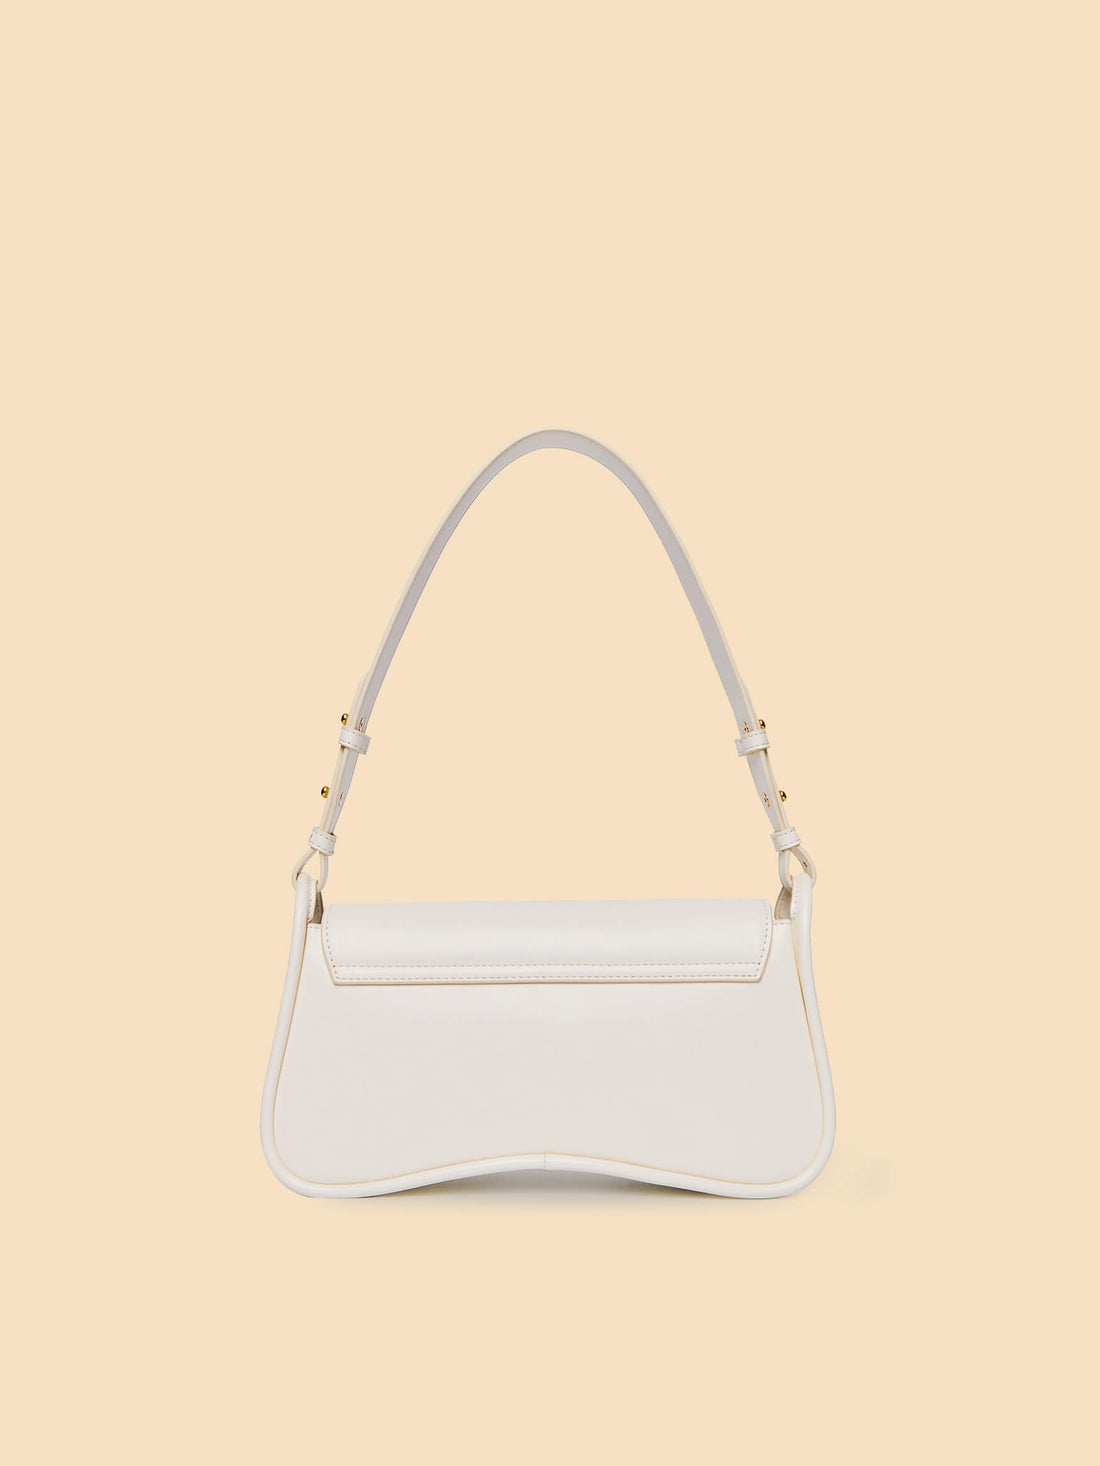 SINBONO Zoe Shoulder Bag White - Cruelty Free Leather Bag for women